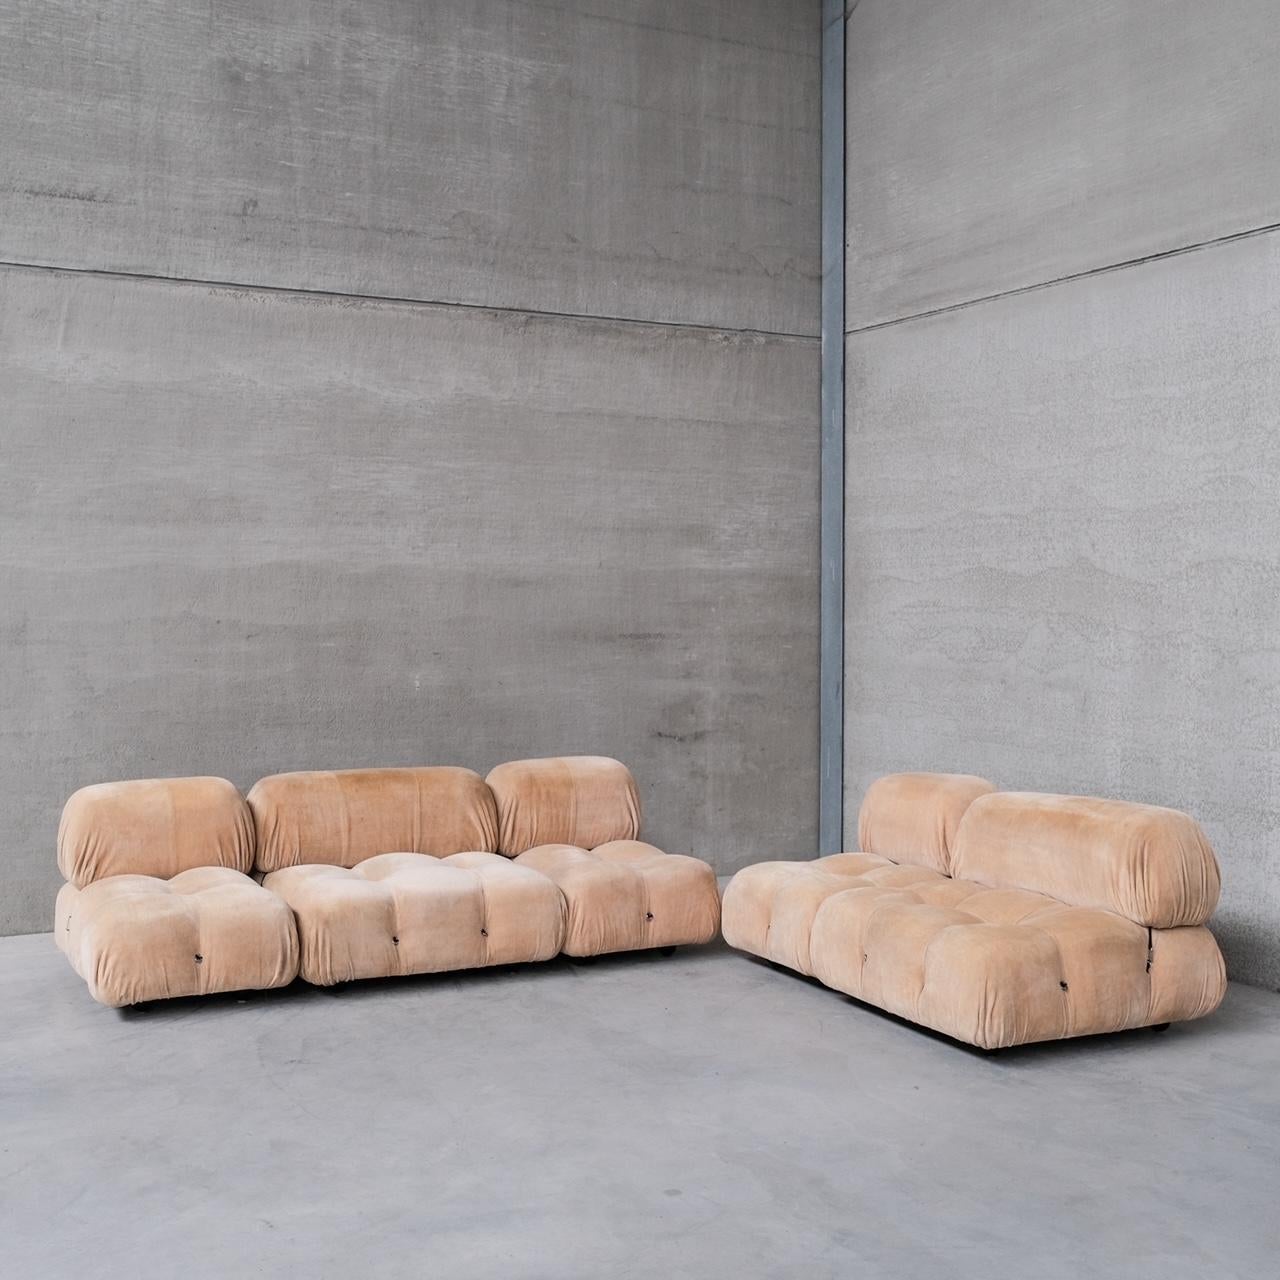 A five piece modular sofa by Mario Bellini for B&B Italia. 

Italy, c1970s, not a contemporary edition. 

Infamous 'Camaleonda' model. 

The modular nature of the sofa allows for creating different room scapes. We have other Camaleonda models